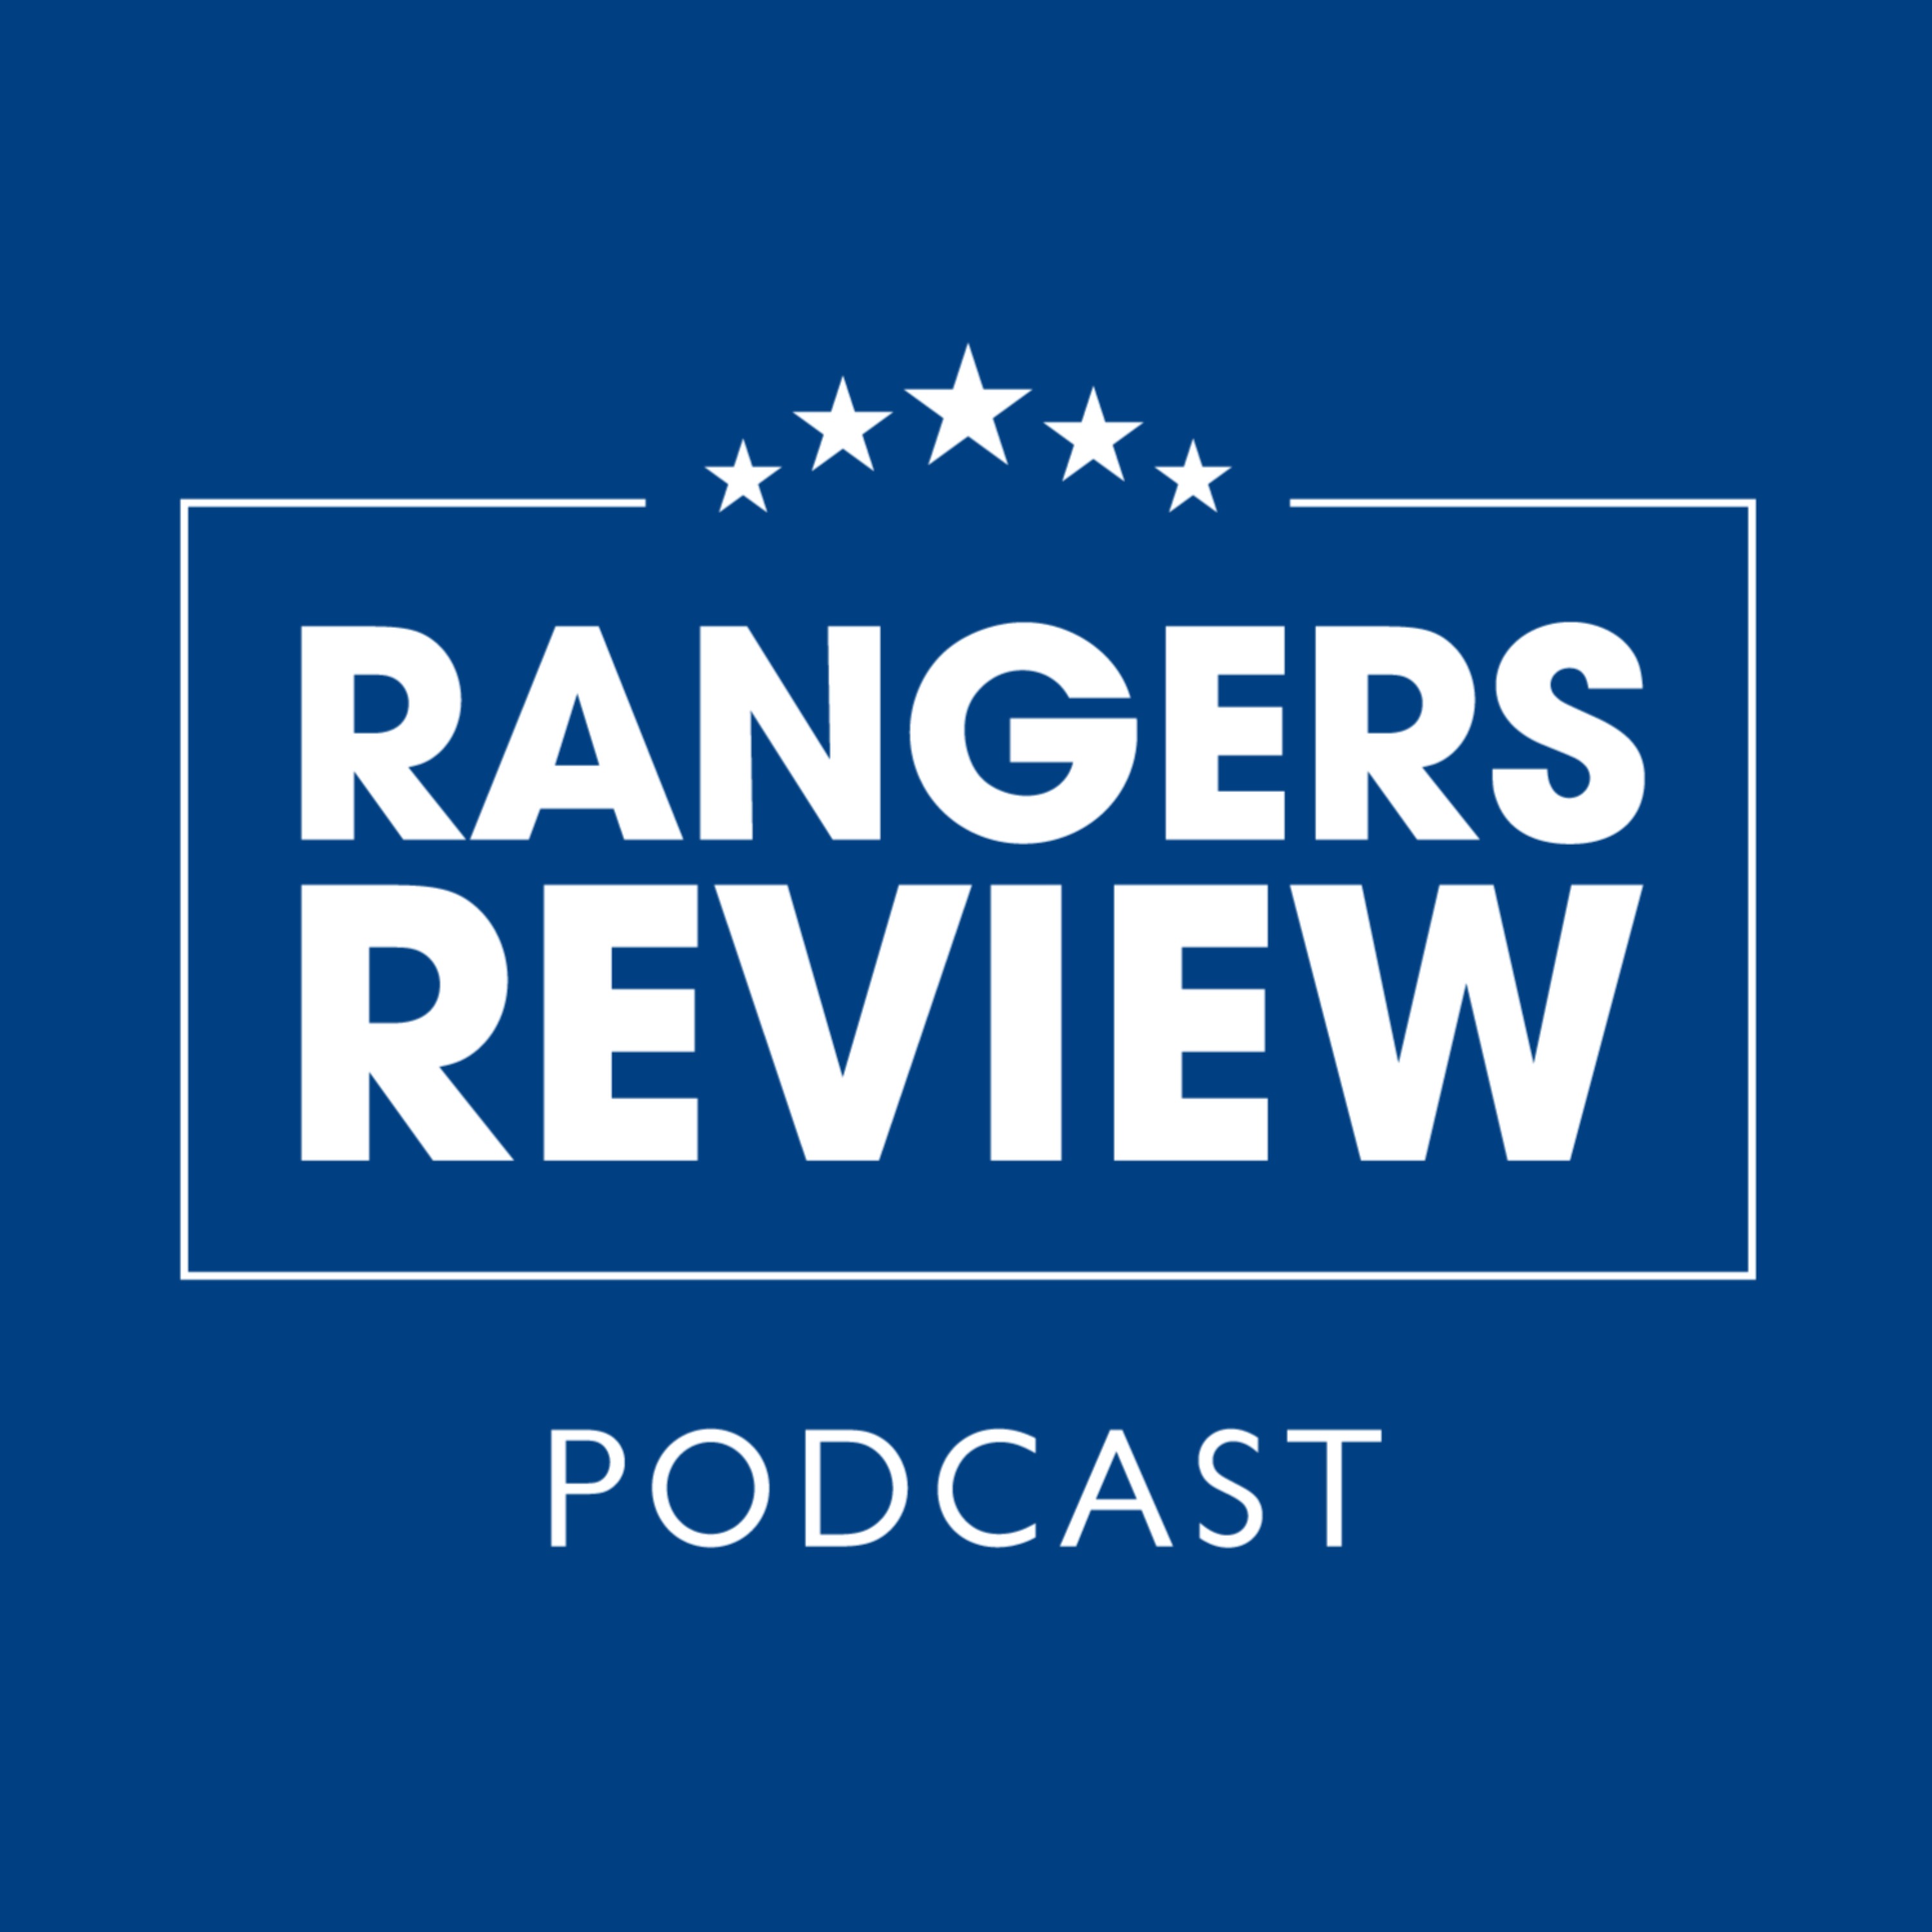 What will Alfredo Morelos' Rangers legacy be?